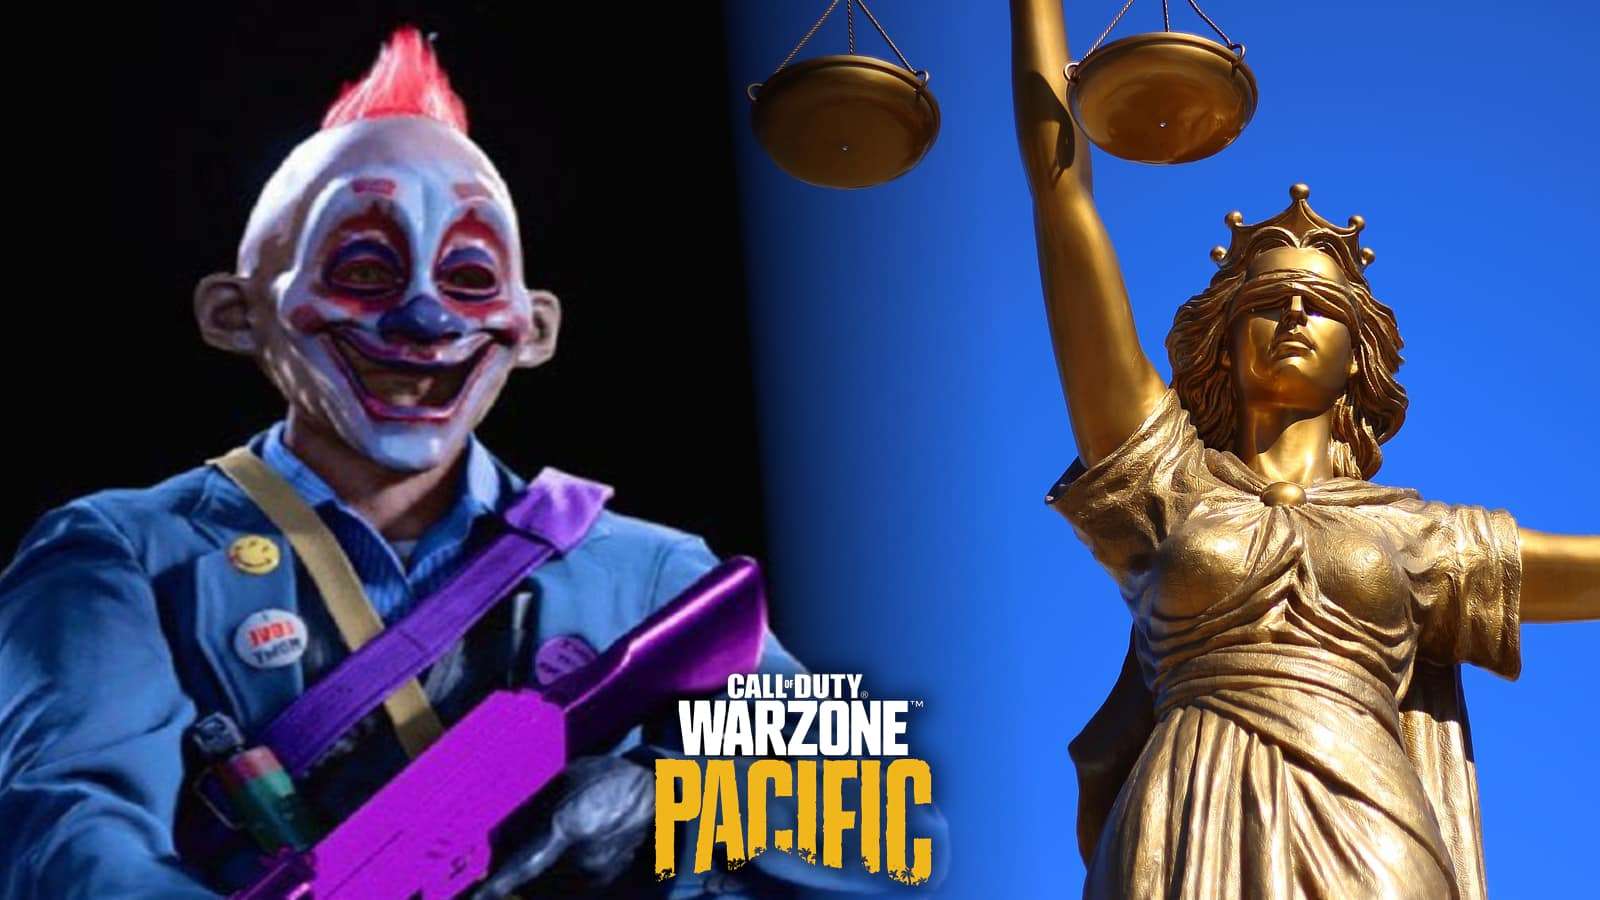 call of duty warzone pacific clown judge